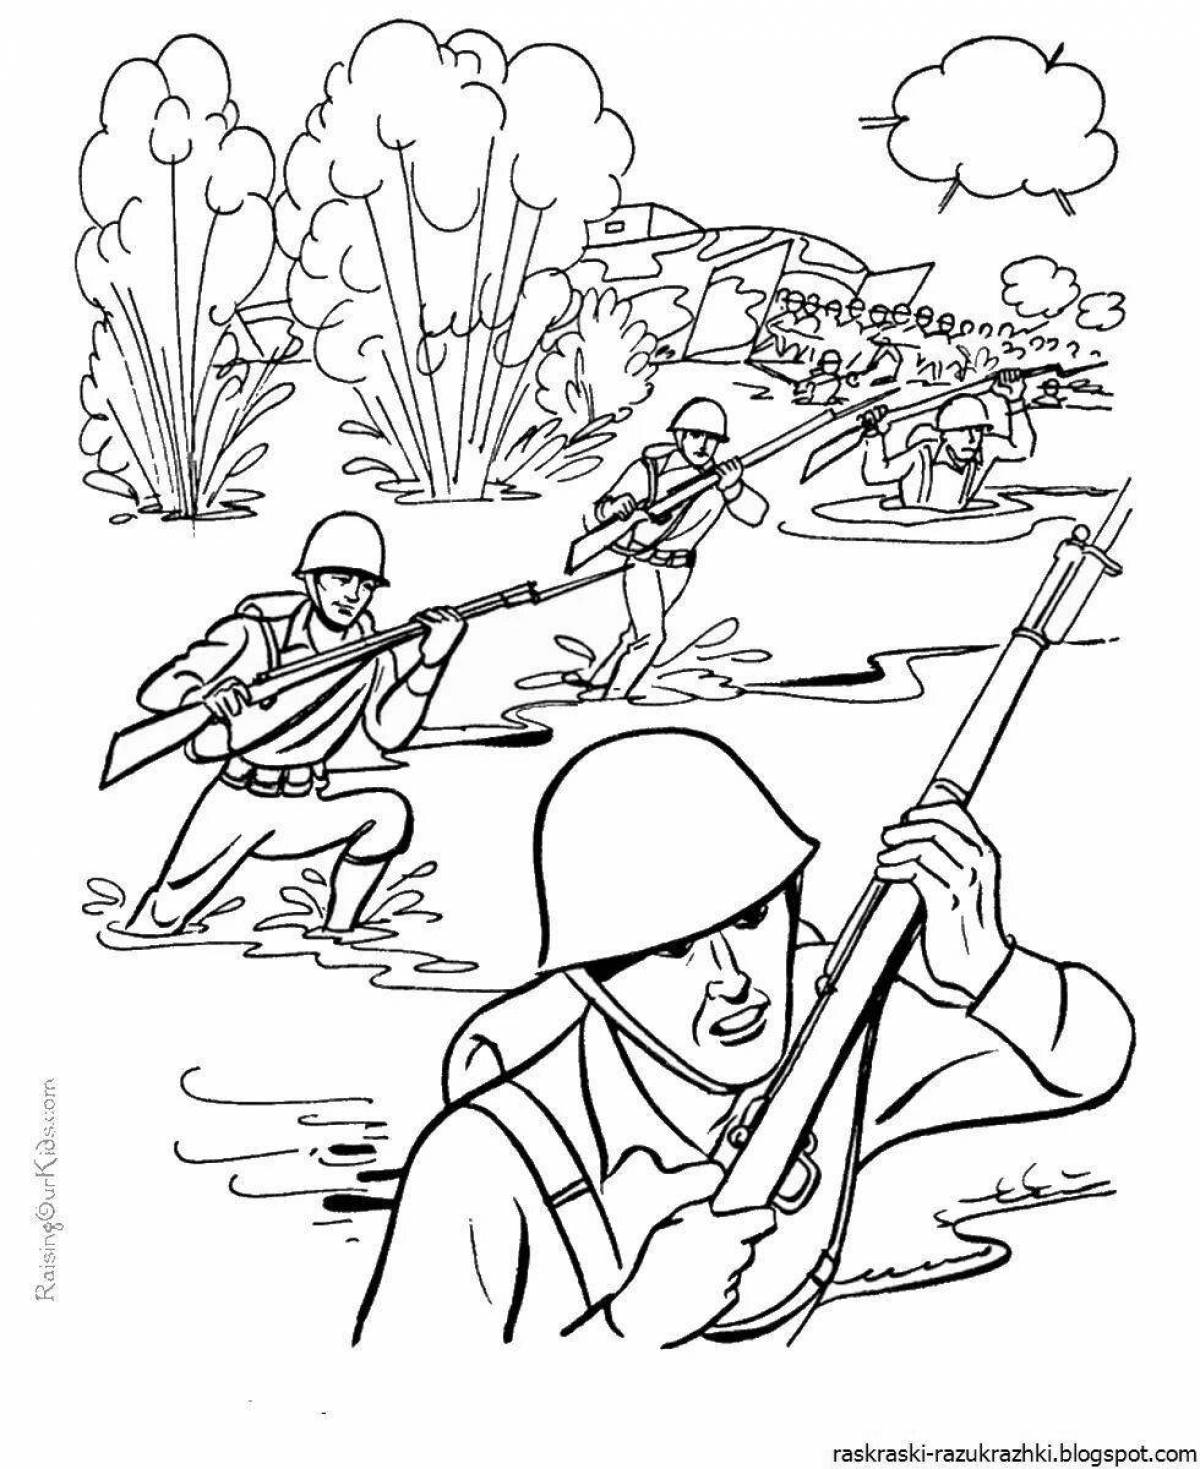 World War II inspirational coloring page